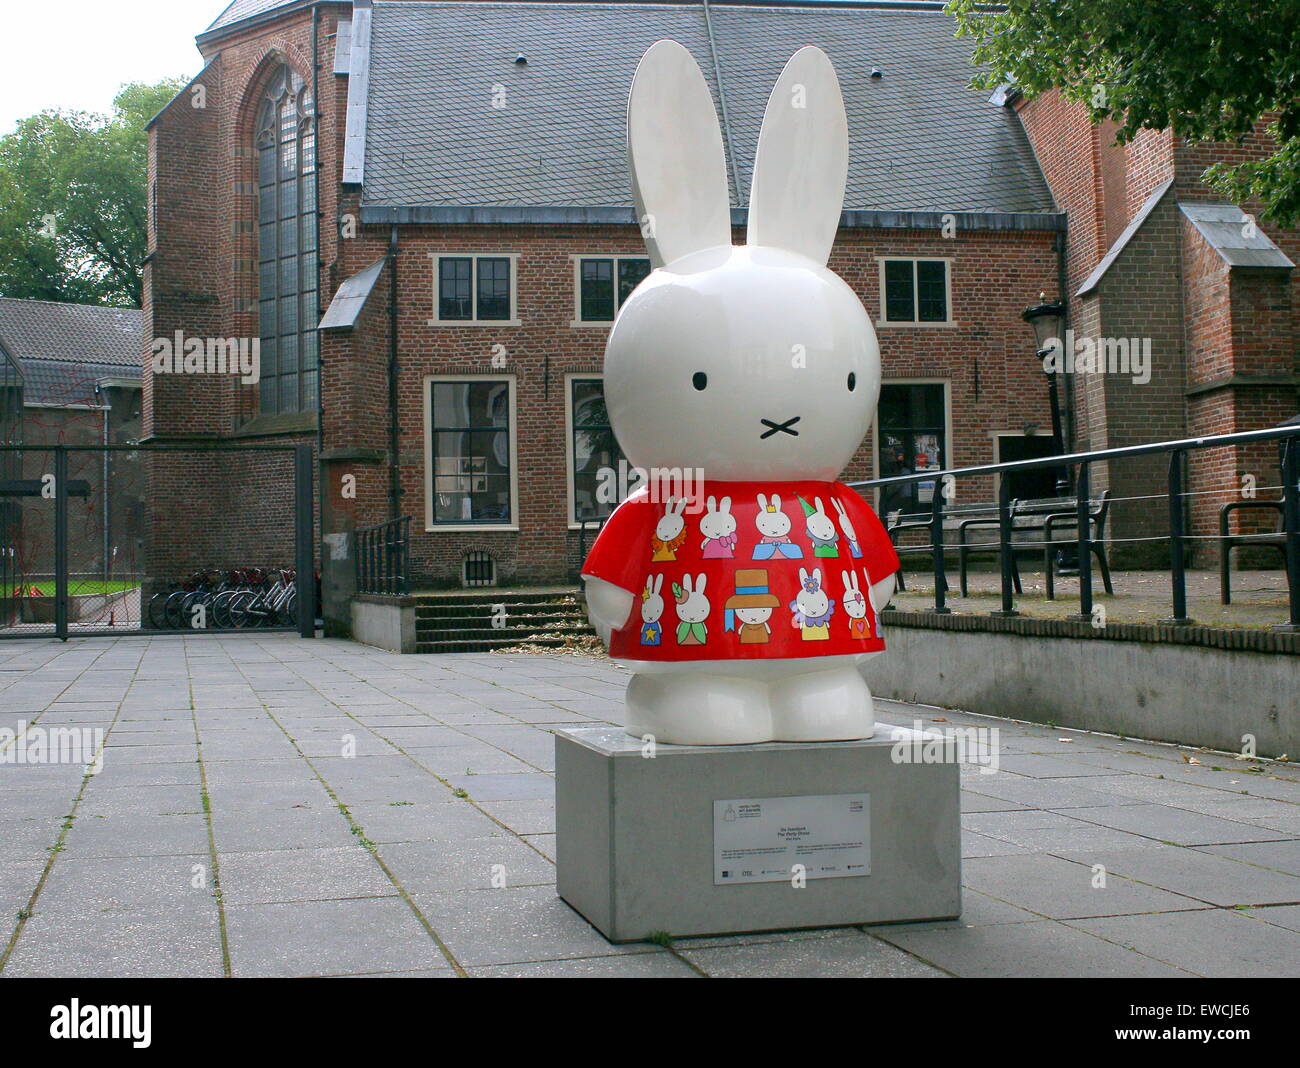 of Miffy (Nijntje) by Dick Bruna, part a current exhibition, celebrating Miffy's 60th birthday in Utrecht, Netherlands Stock Photo Alamy